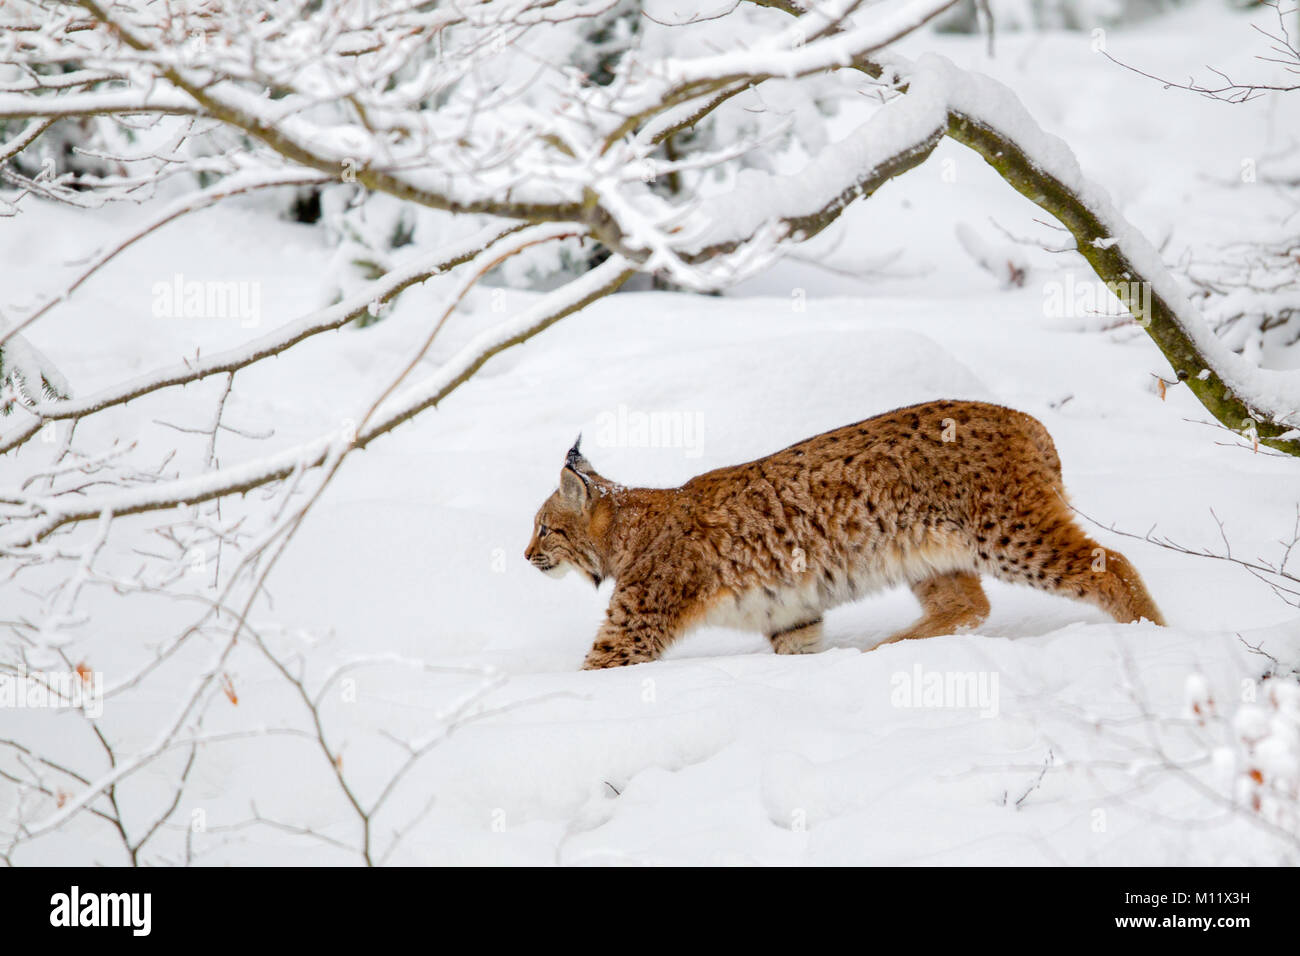 Eurasian lynx (Lynx lynx) in the snow in the animal enclosure in the Bavarian Forest National Park, Bavaria, Germany. Stock Photo